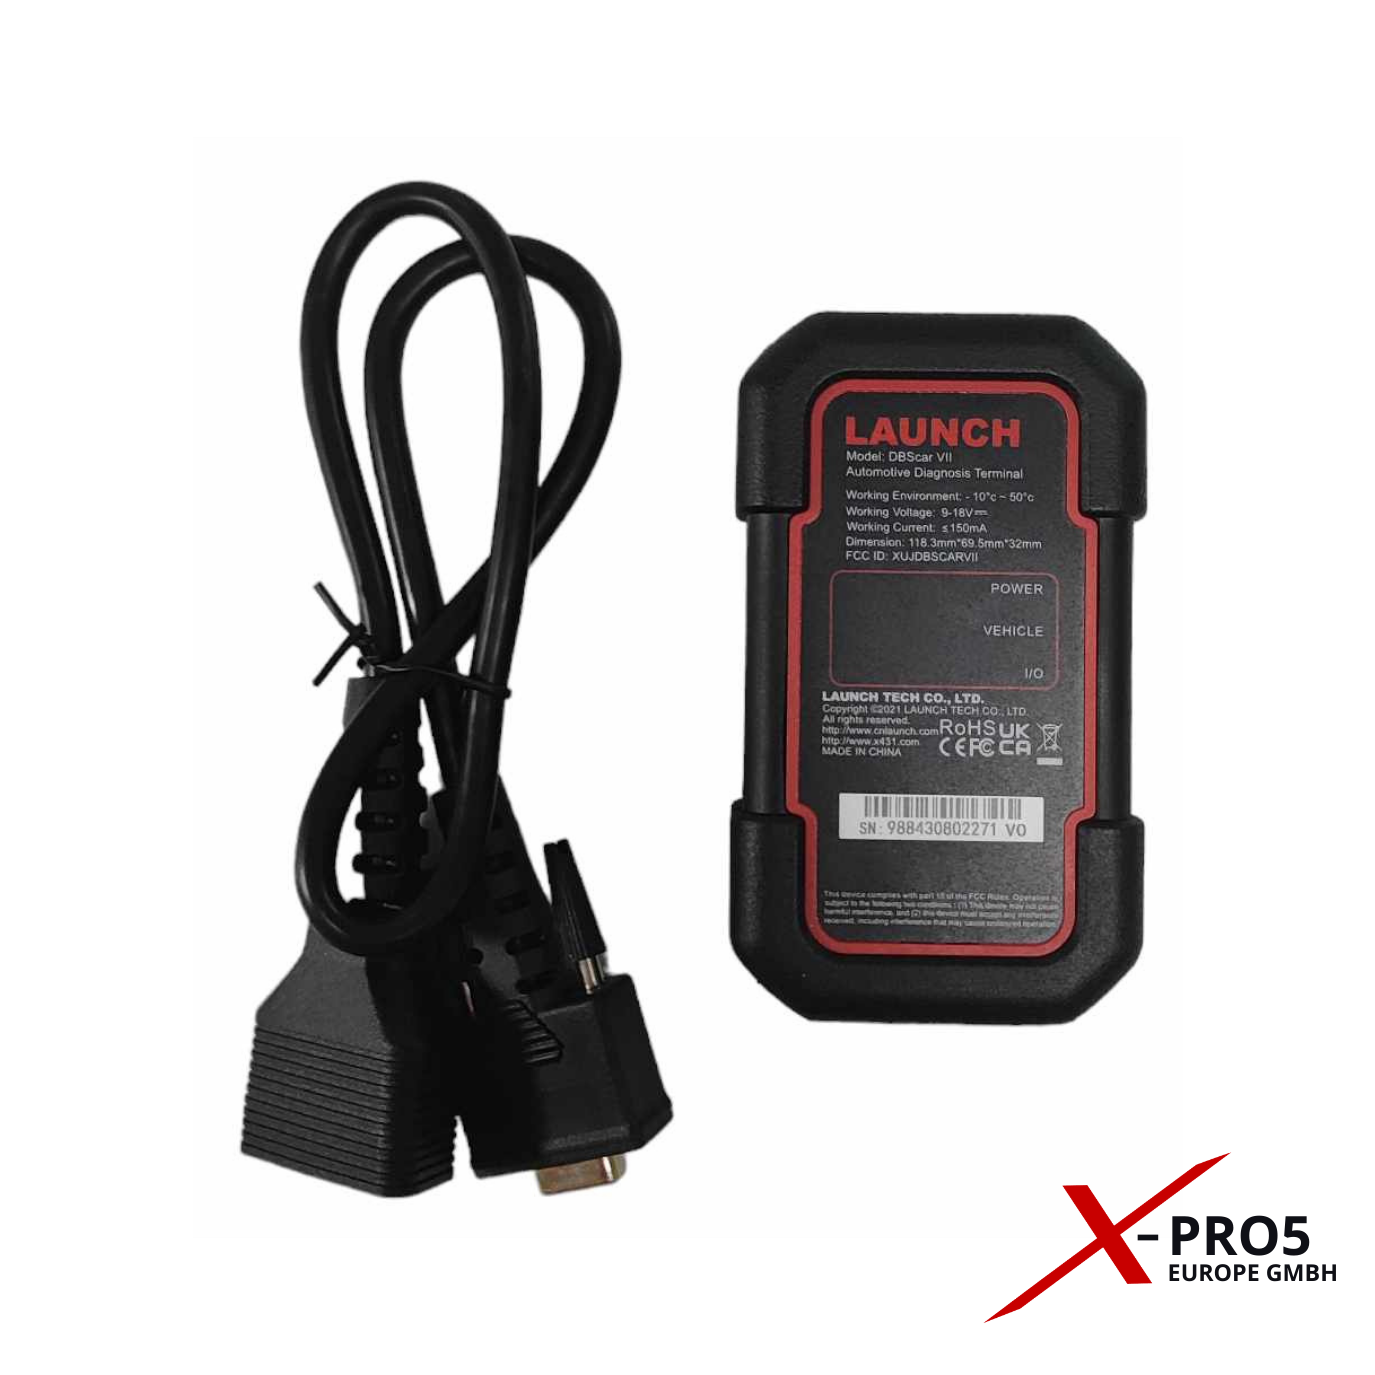 Common Car Diagnostic Tool Errors and Their Solutions - AUTO XDIAG